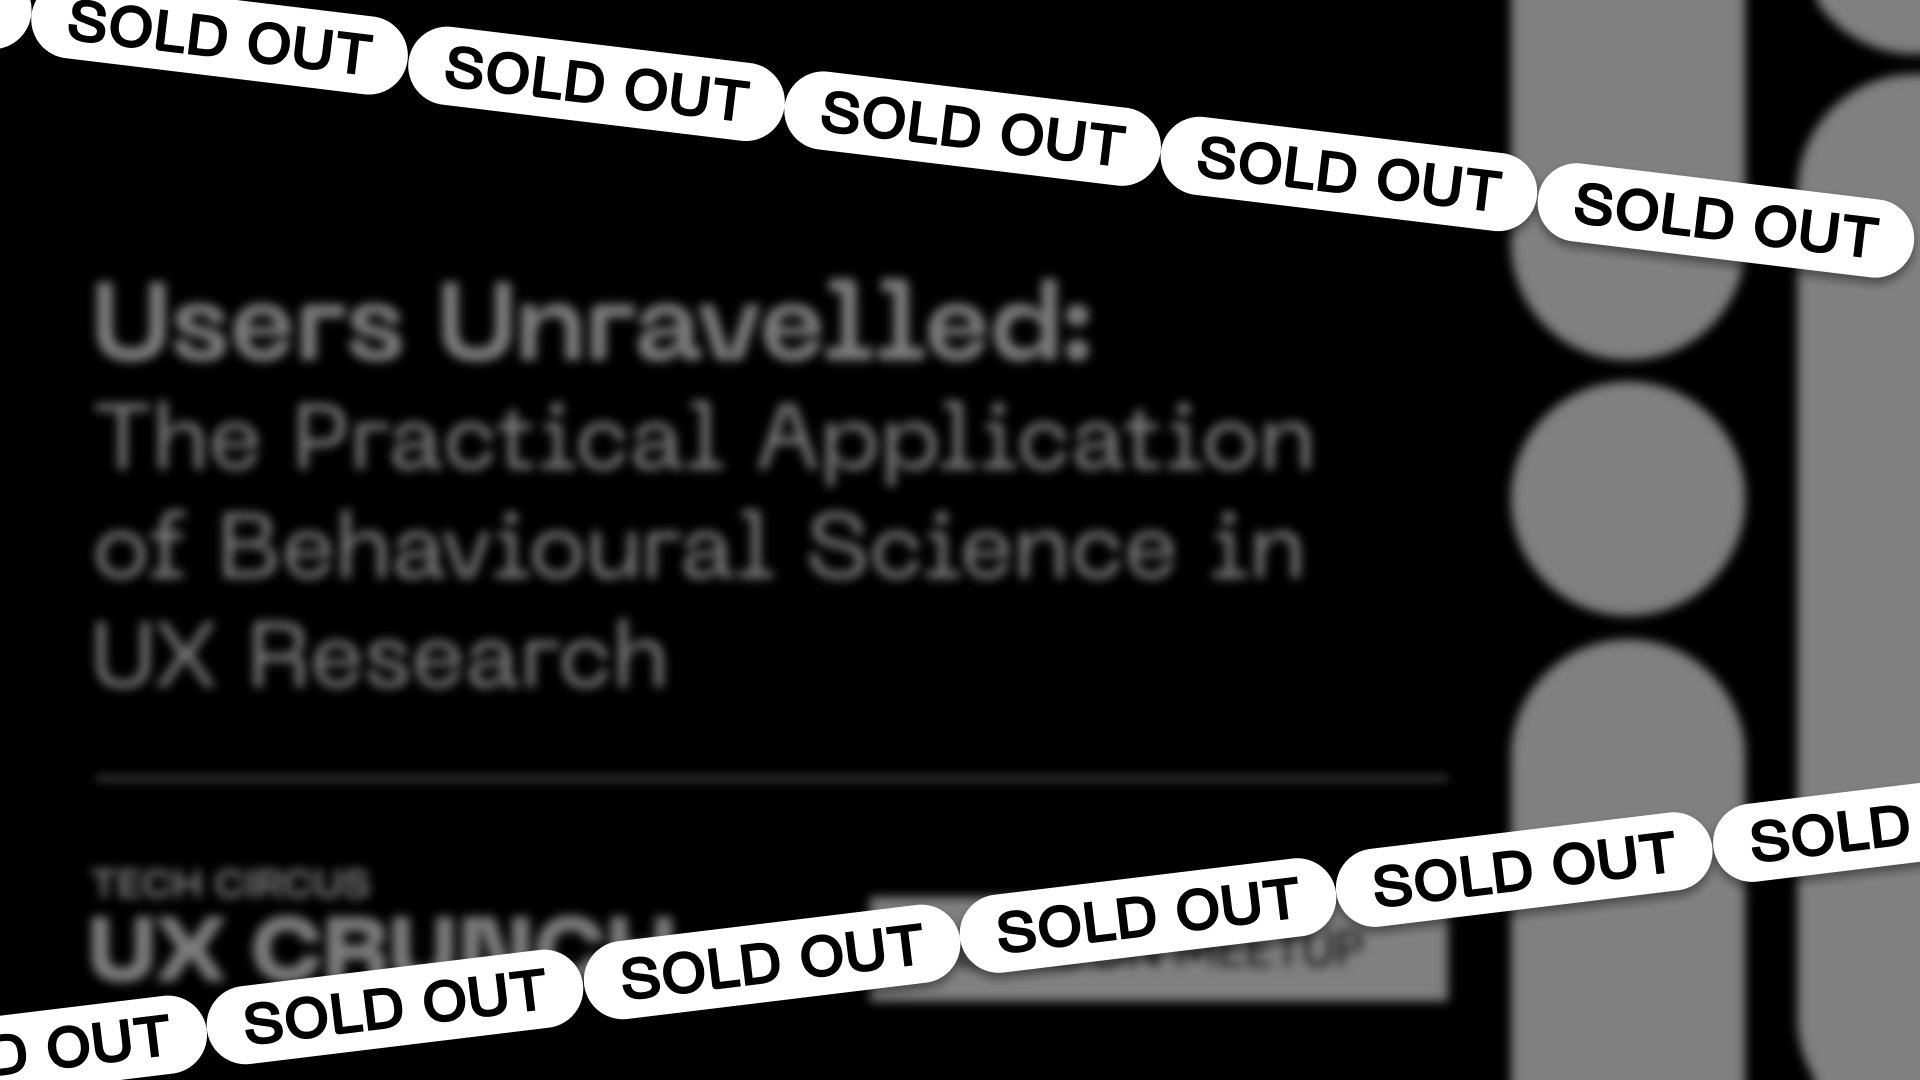 Users Unravelled: The Practical Application of Behavioural Science in UX Research